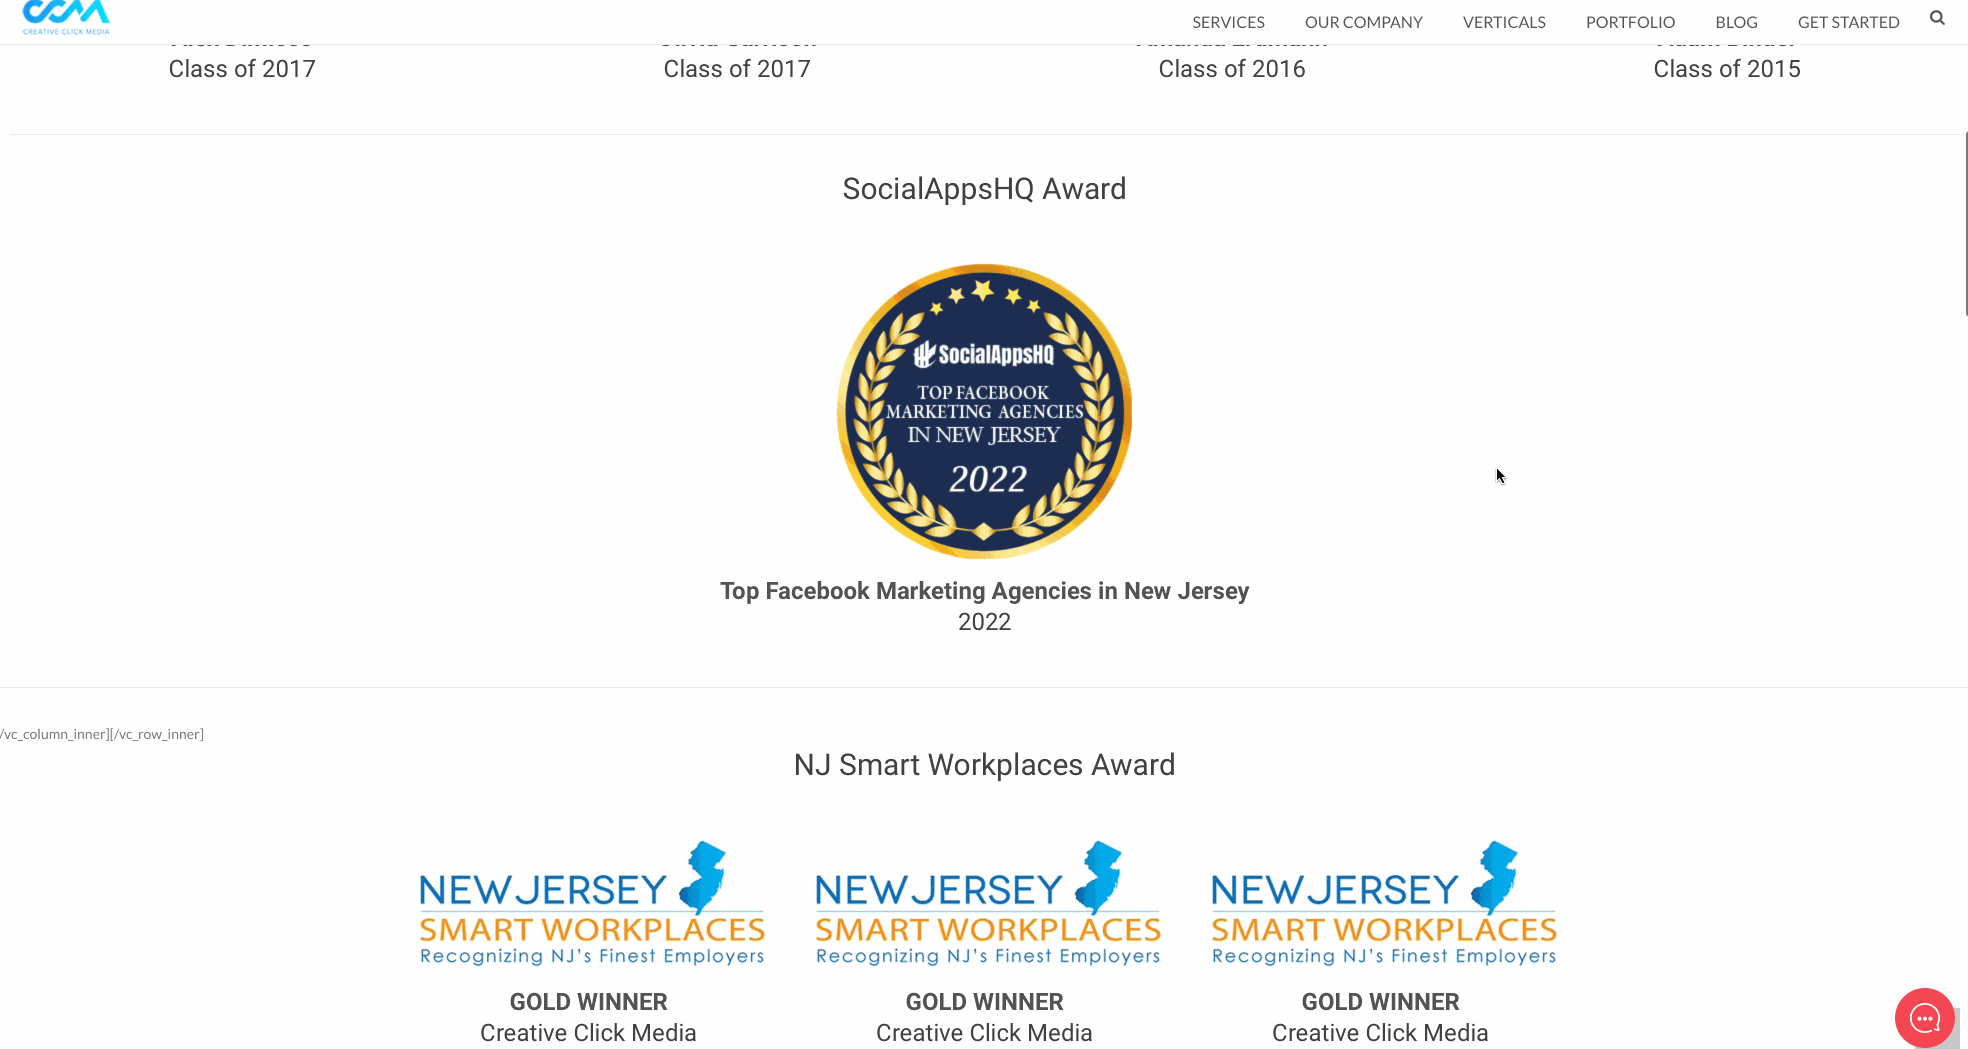 list of awards won by a digital agency example from their website 